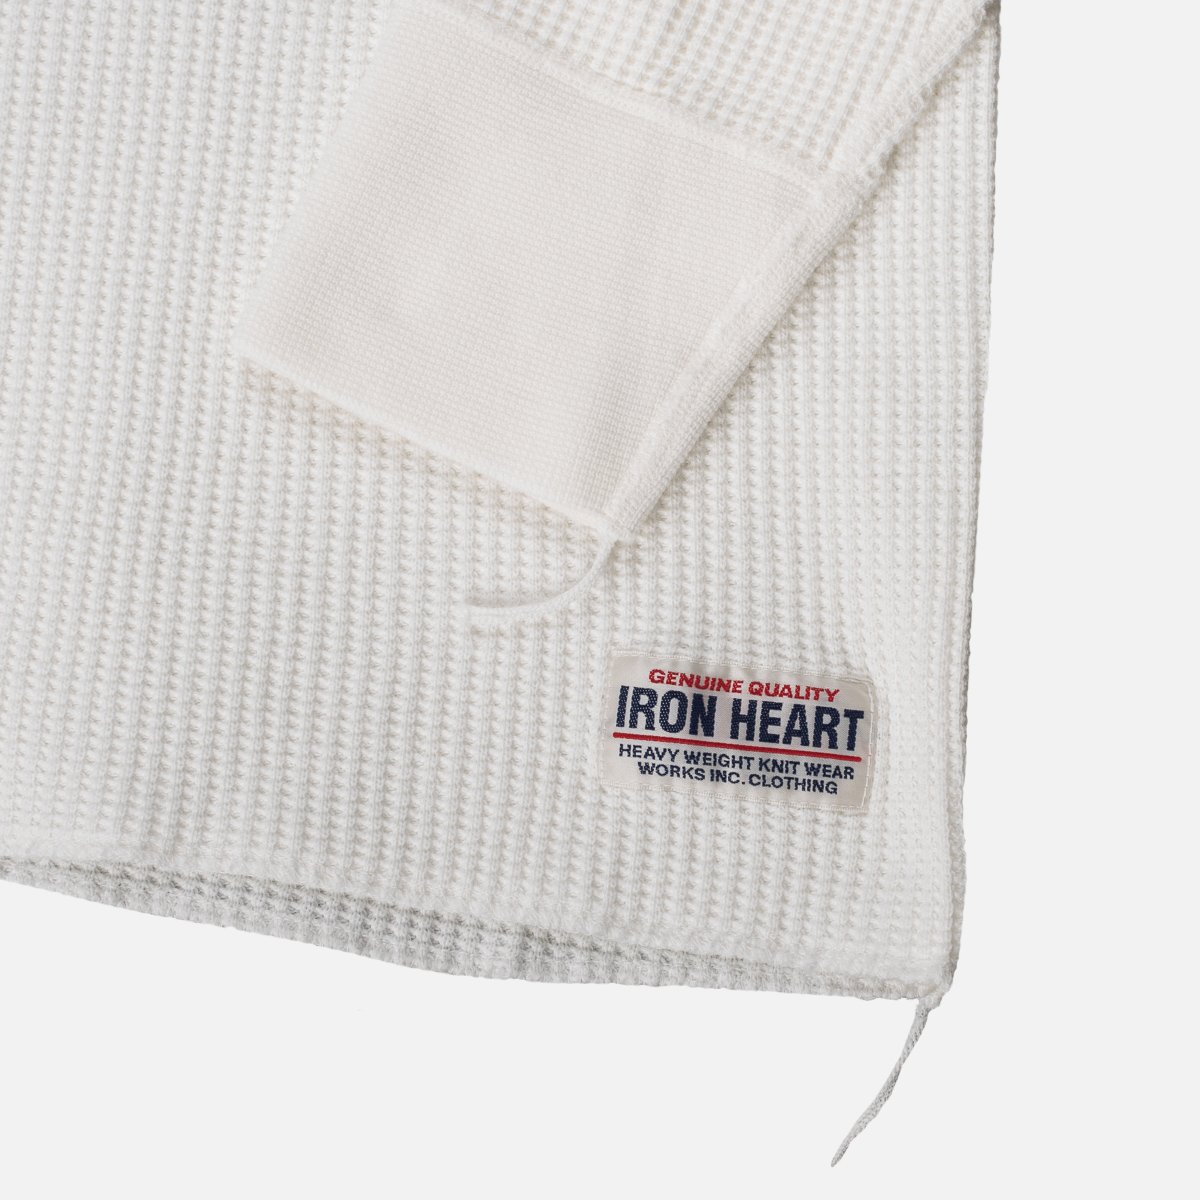 Iron Heart IHTL-1301 Waffle Knit Long Sleeved Crew Neck Thermal Top - White